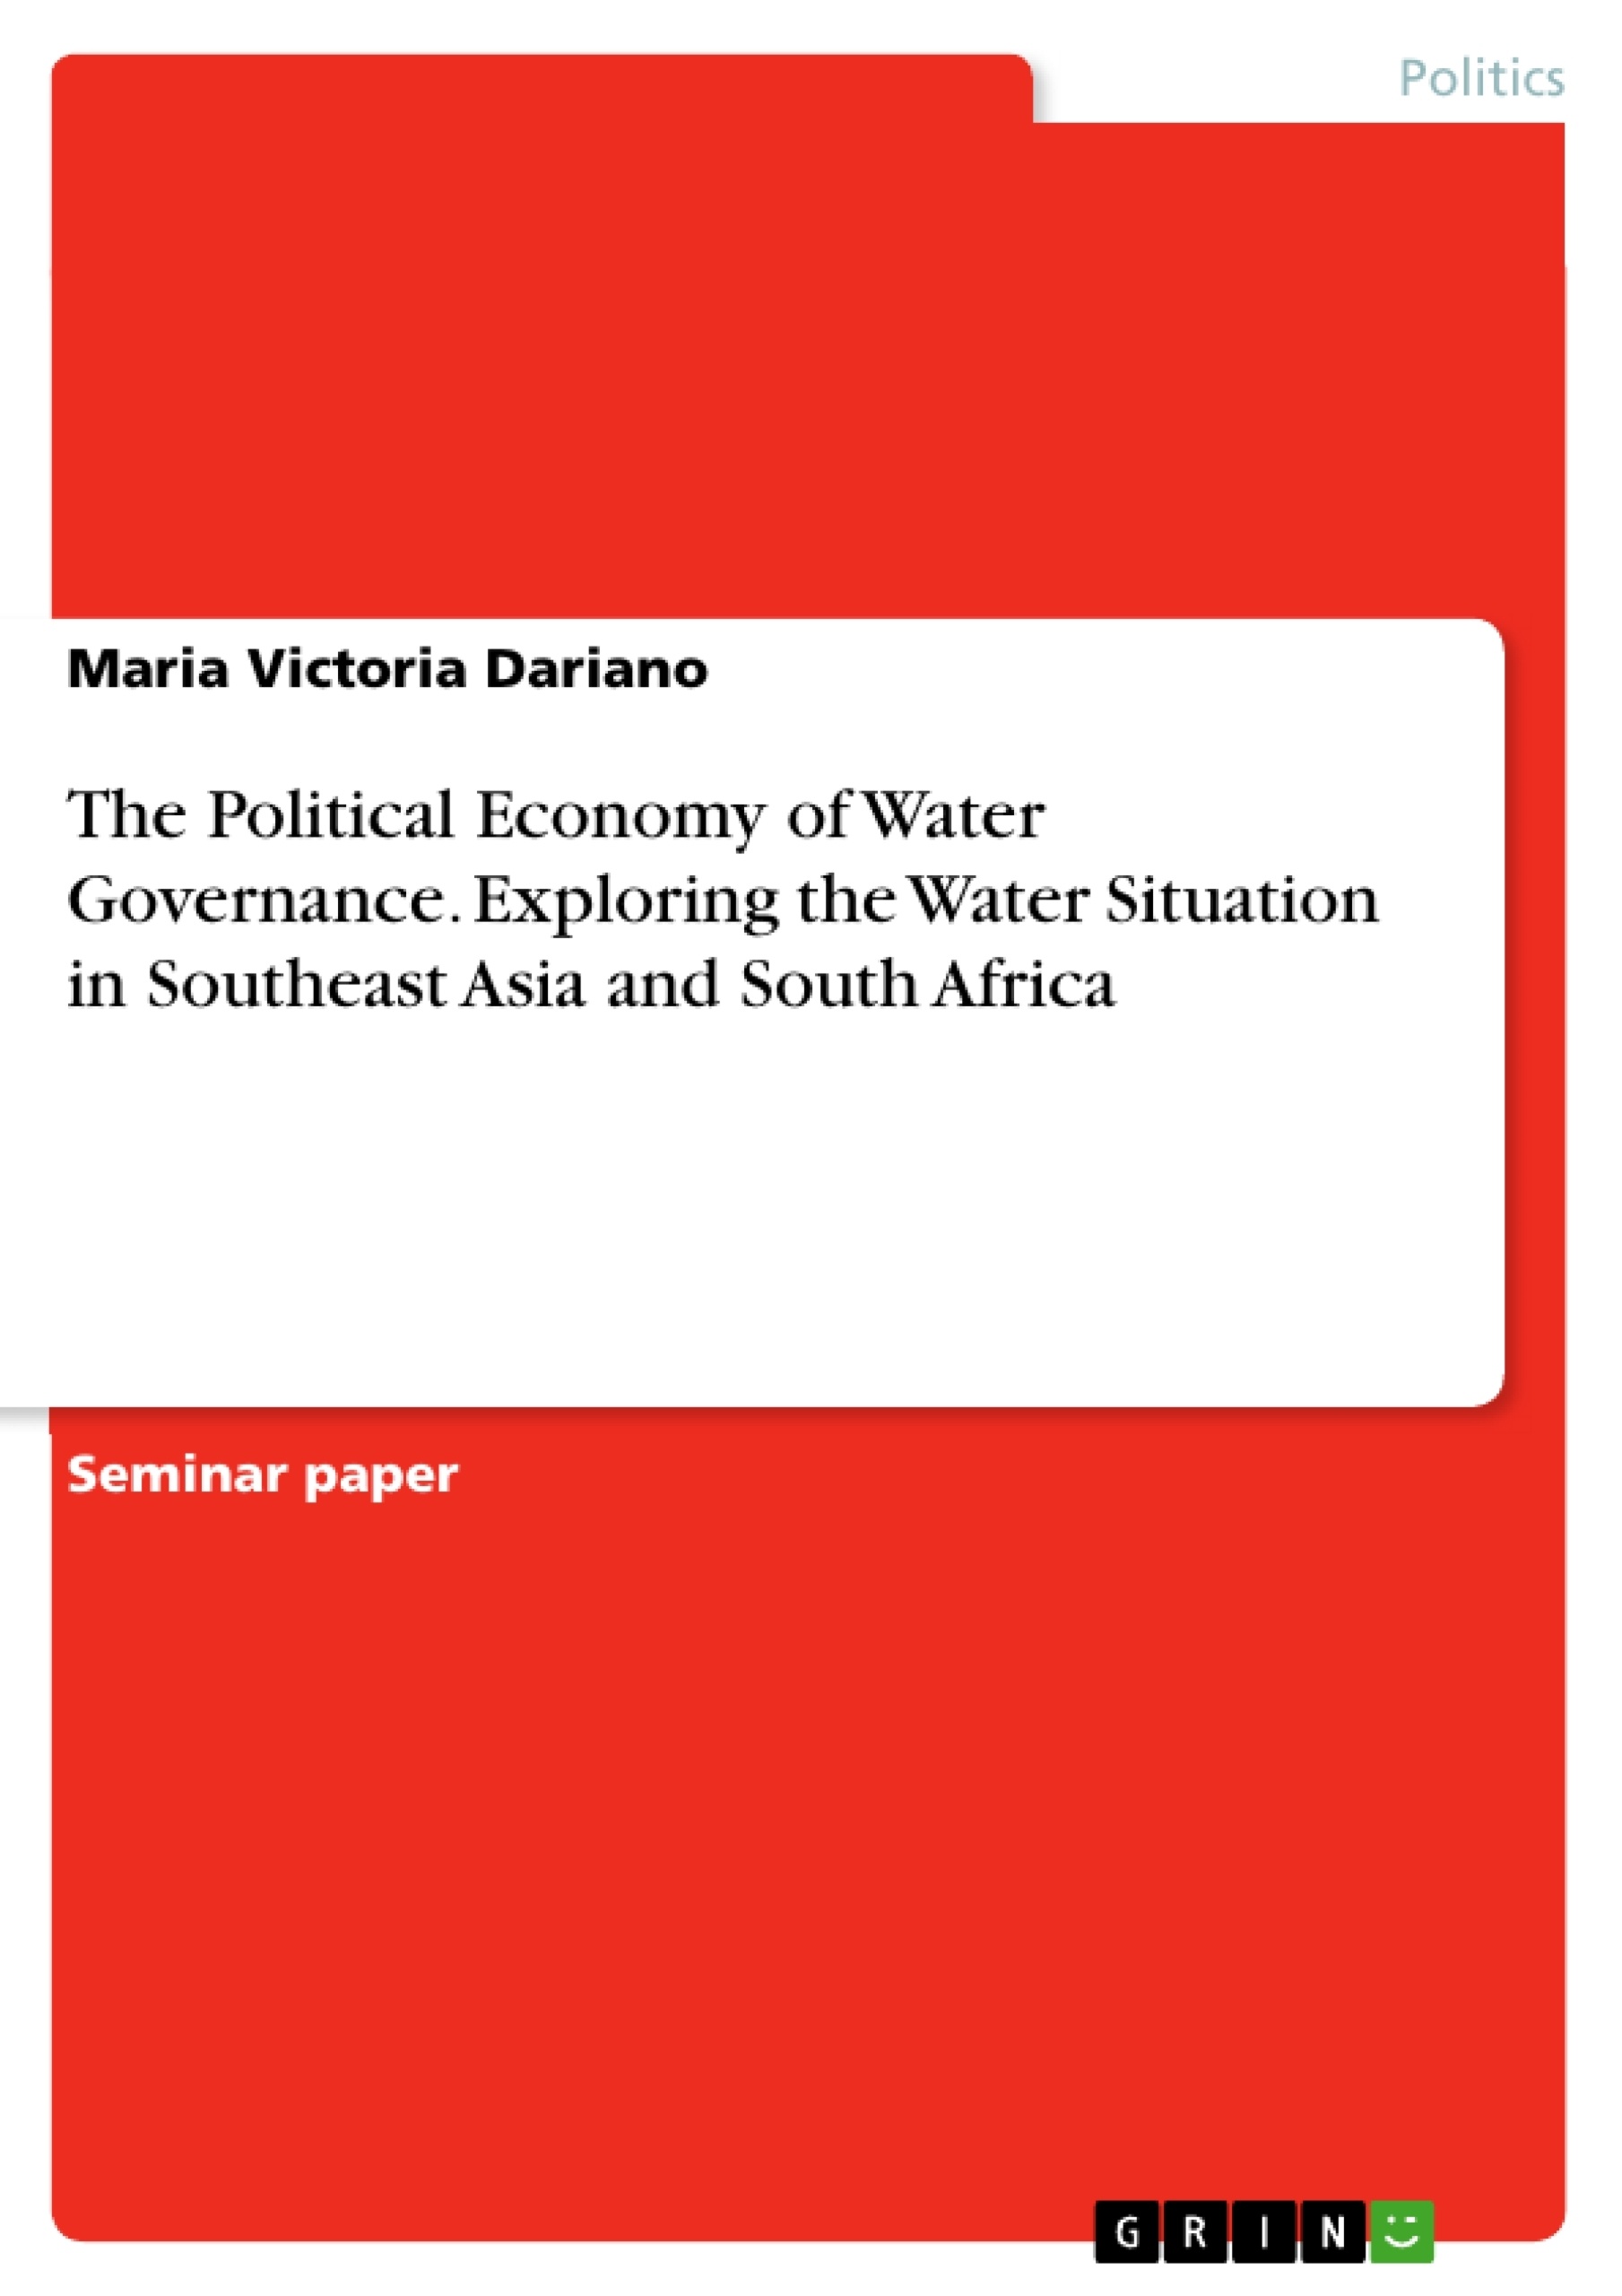 Título: The Political Economy of Water Governance. Exploring the Water Situation in Southeast Asia and South Africa